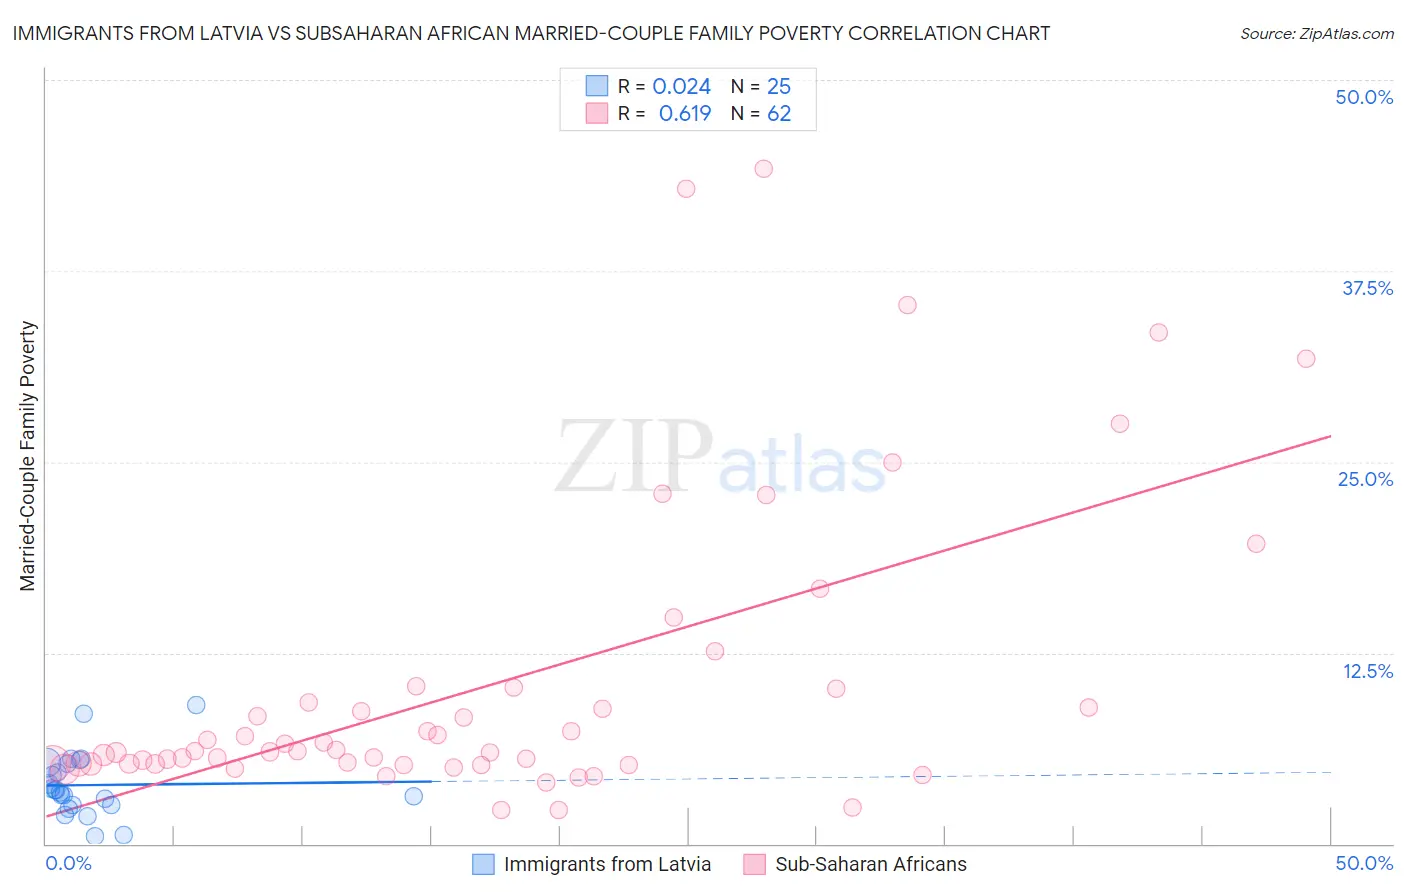 Immigrants from Latvia vs Subsaharan African Married-Couple Family Poverty